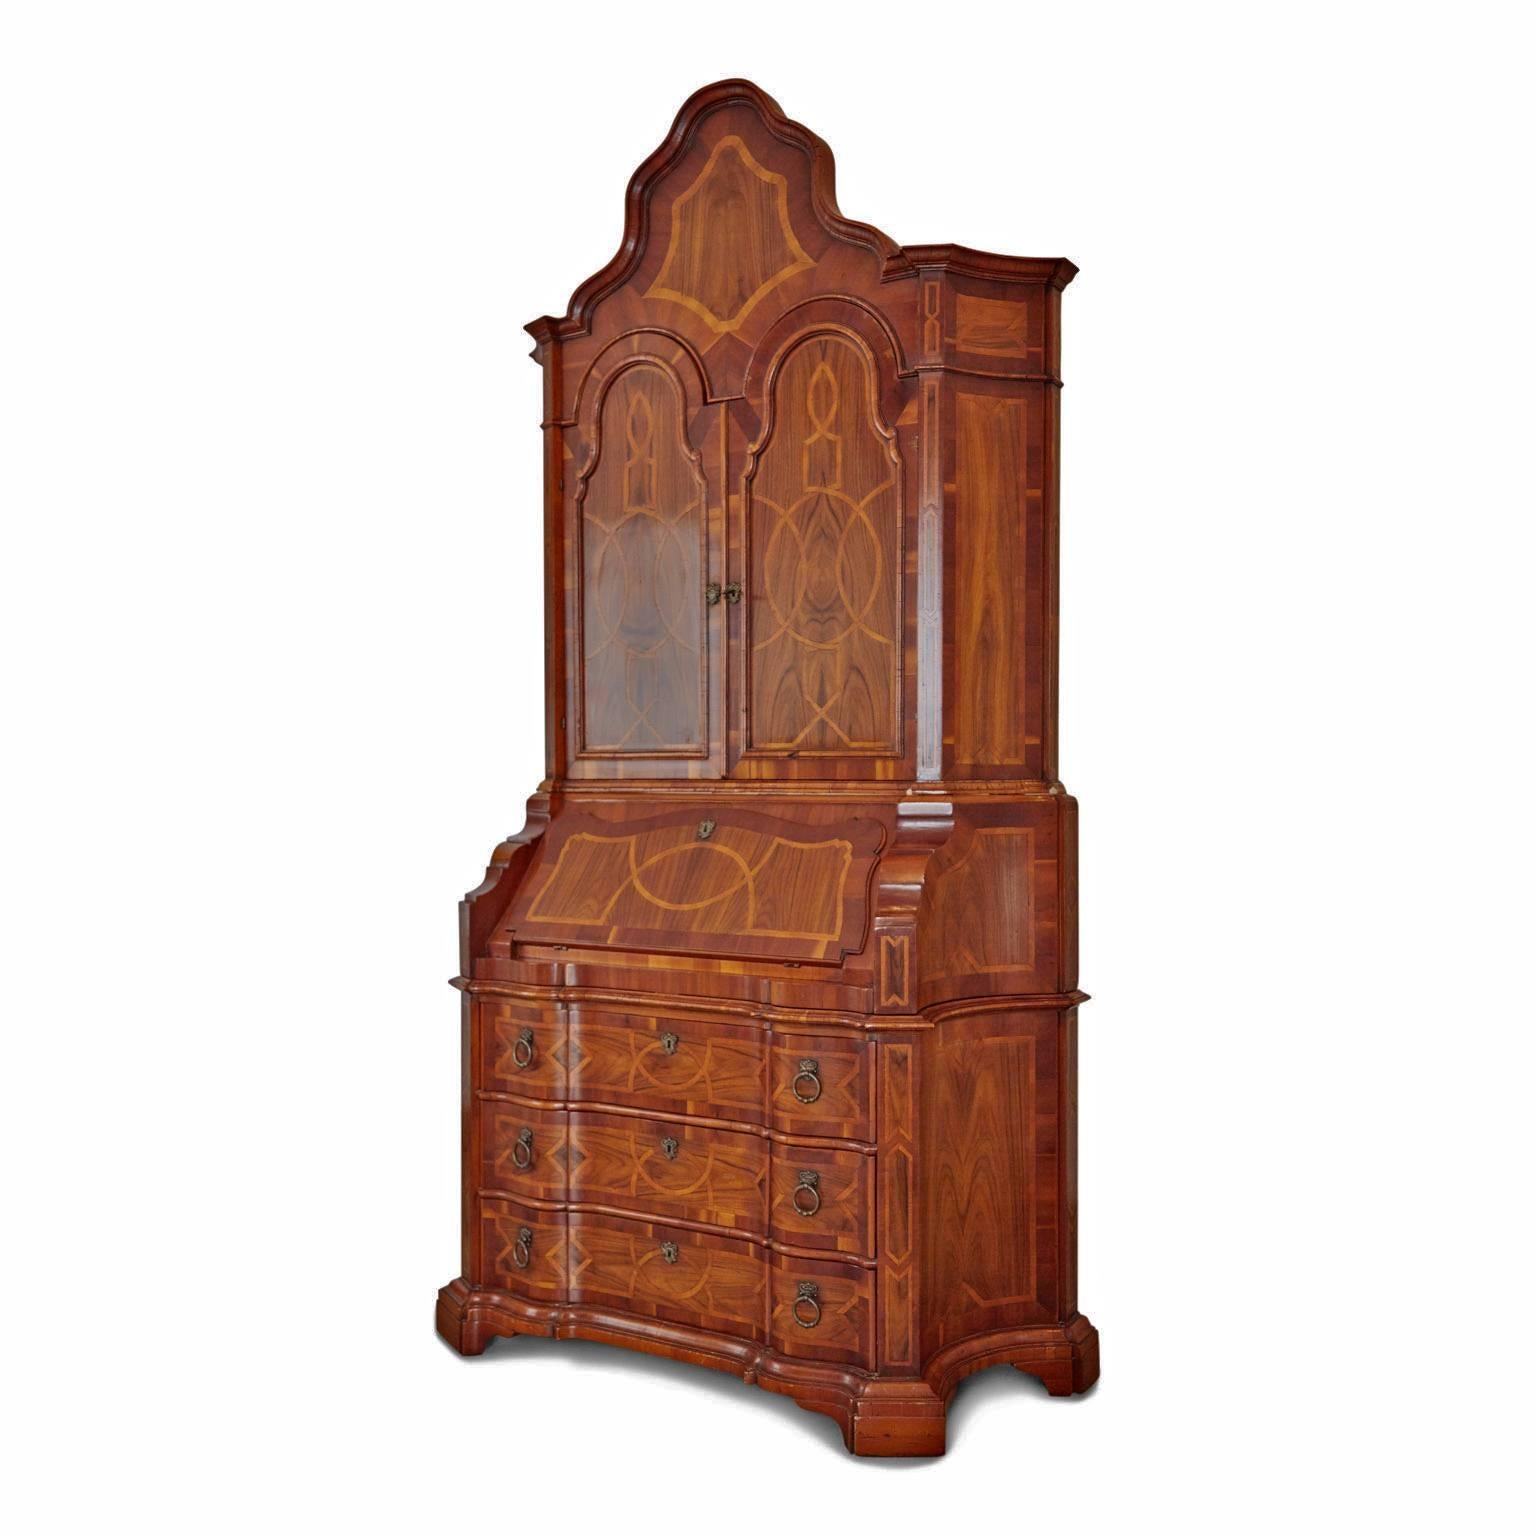 Impressive Italian Baroque style walnut secretaries or bureau that has been intricately inlaid, displaying expert craftsmanship and tonal wood. This grand piece is comprised of three (3) pieces that stack on top of each other. 

The upper half